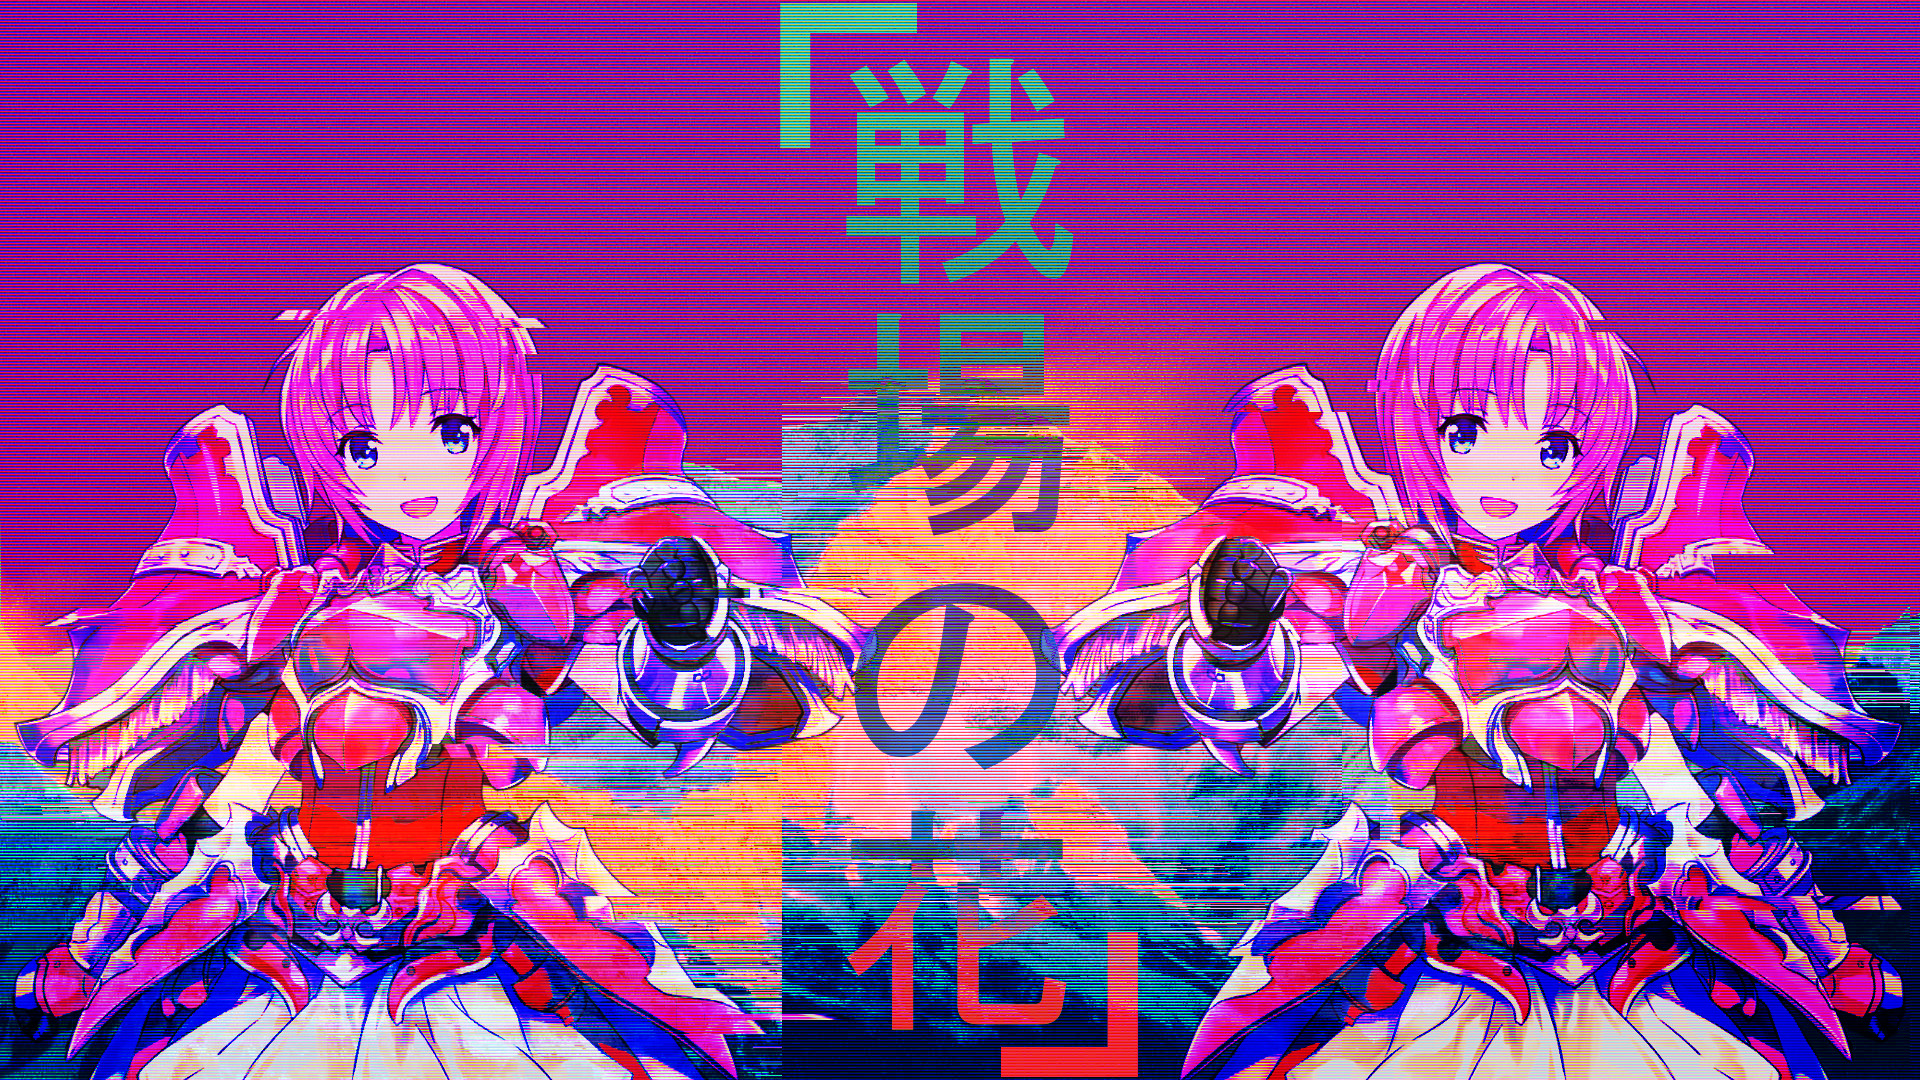 My Anime Vaporwave Wallpaper #22 by iamthebest052 on ...